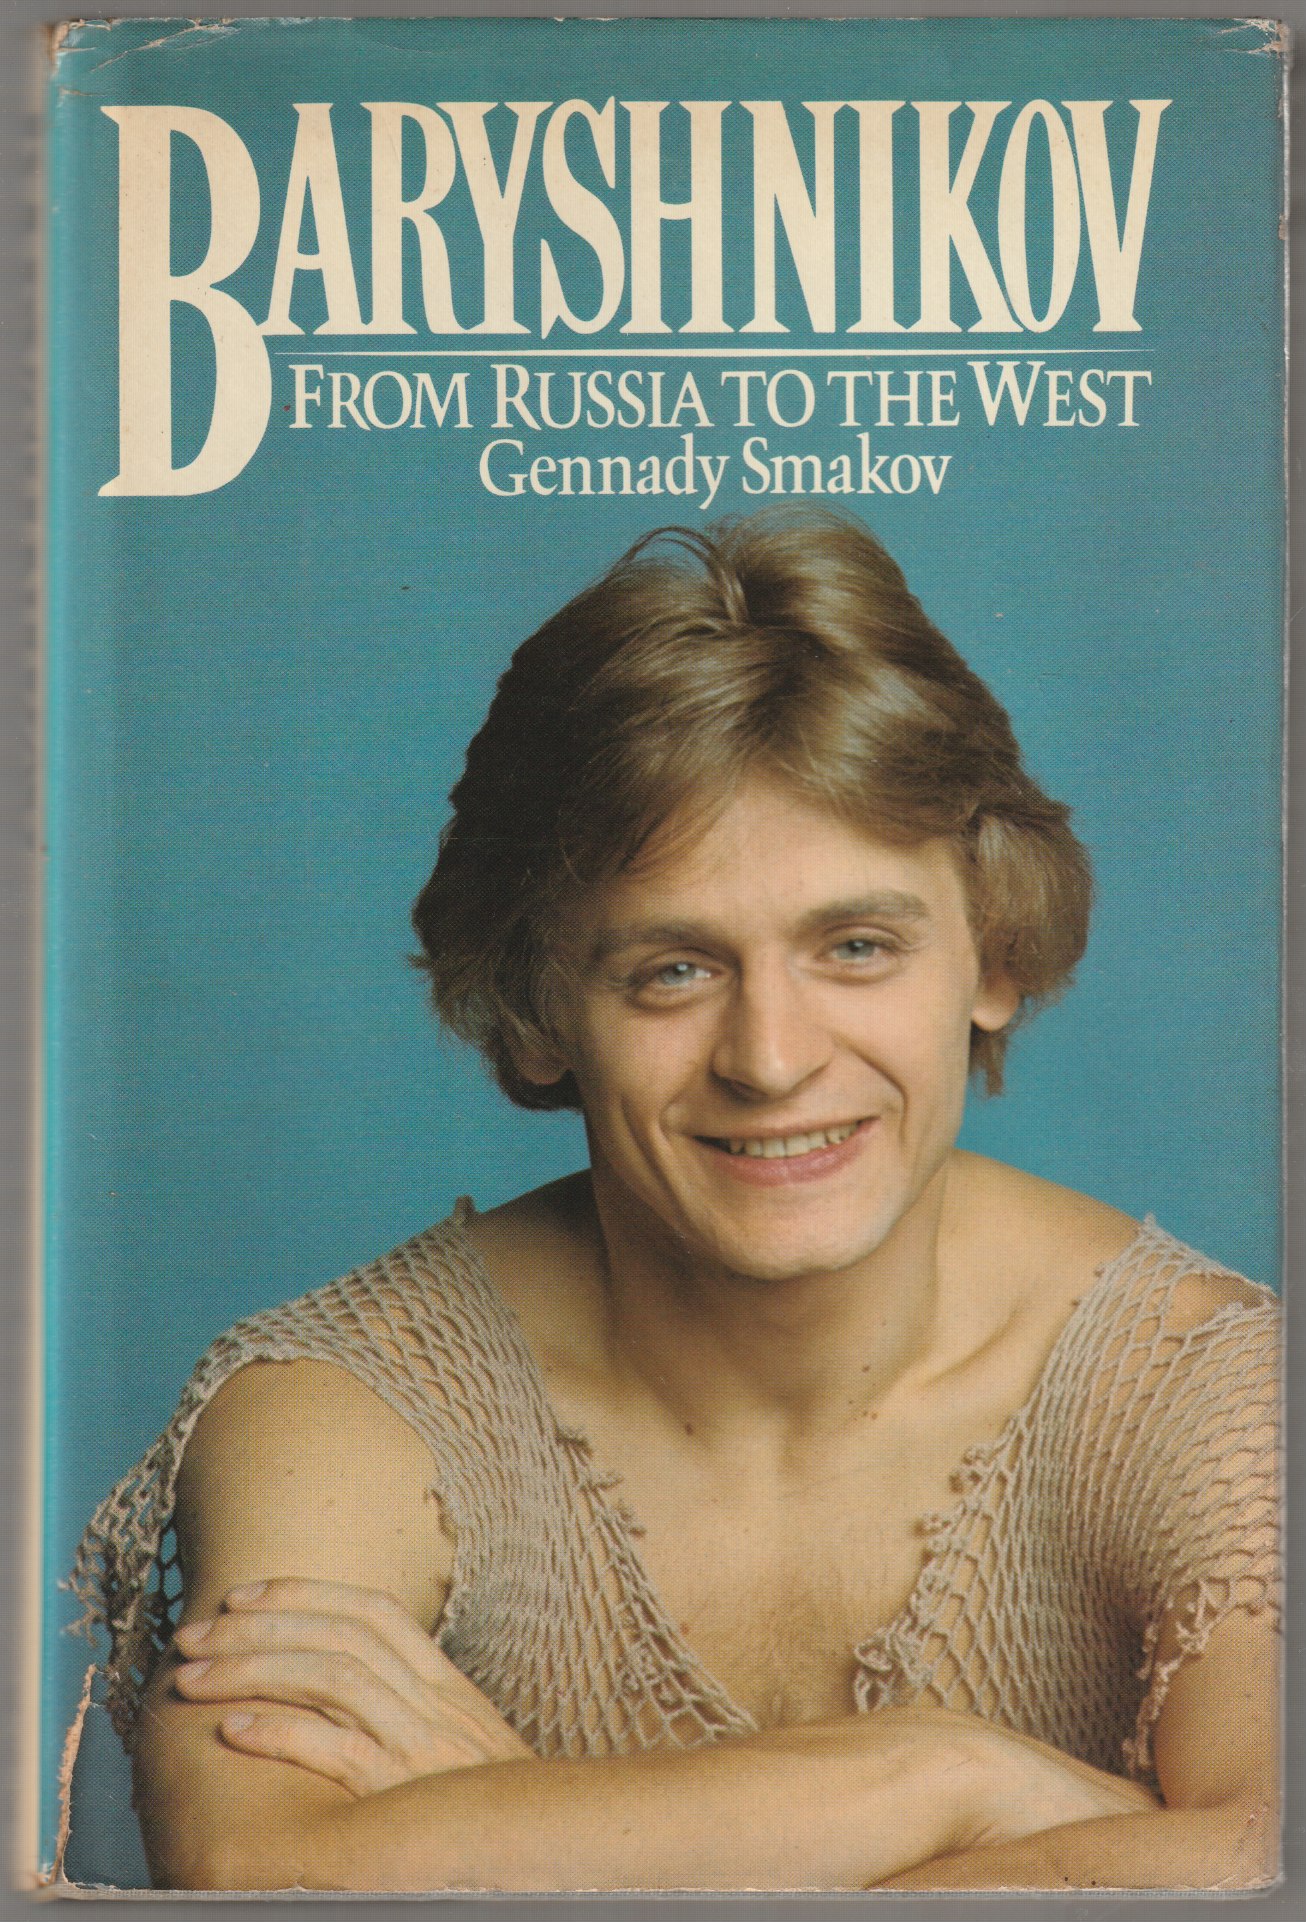 Baryshnikov : from Russia to the West.